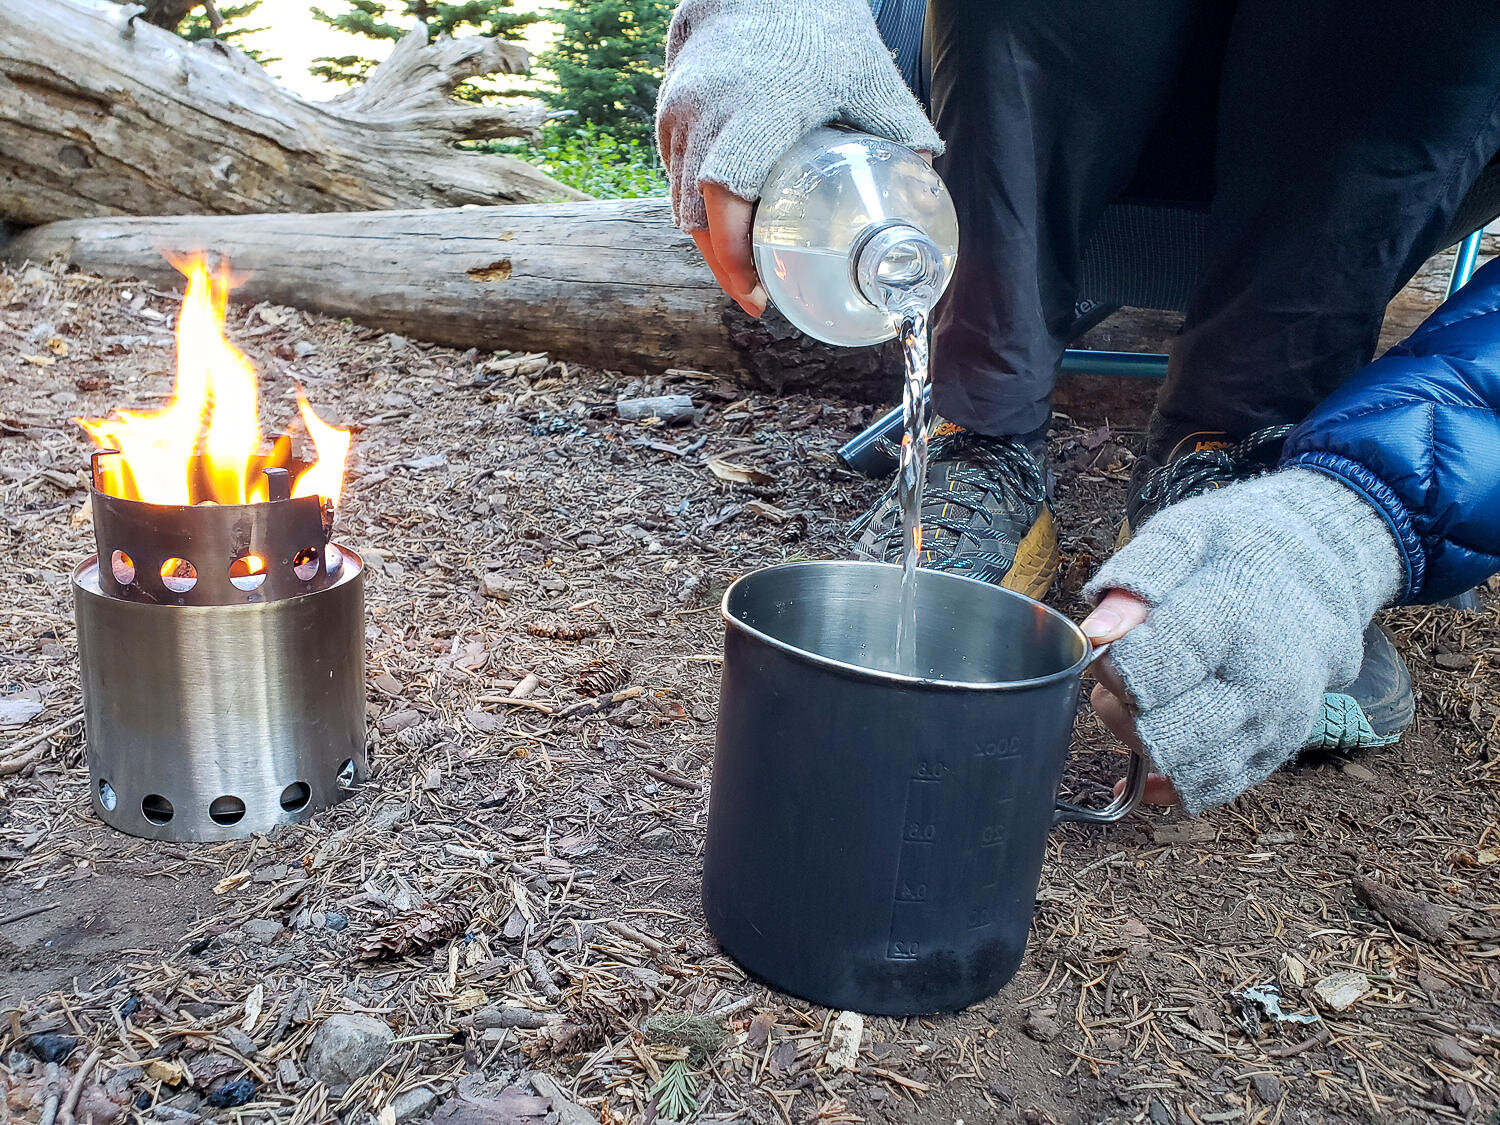 Pouring water into a pot next to the flaming Solo Stove Lite backpacking stove.